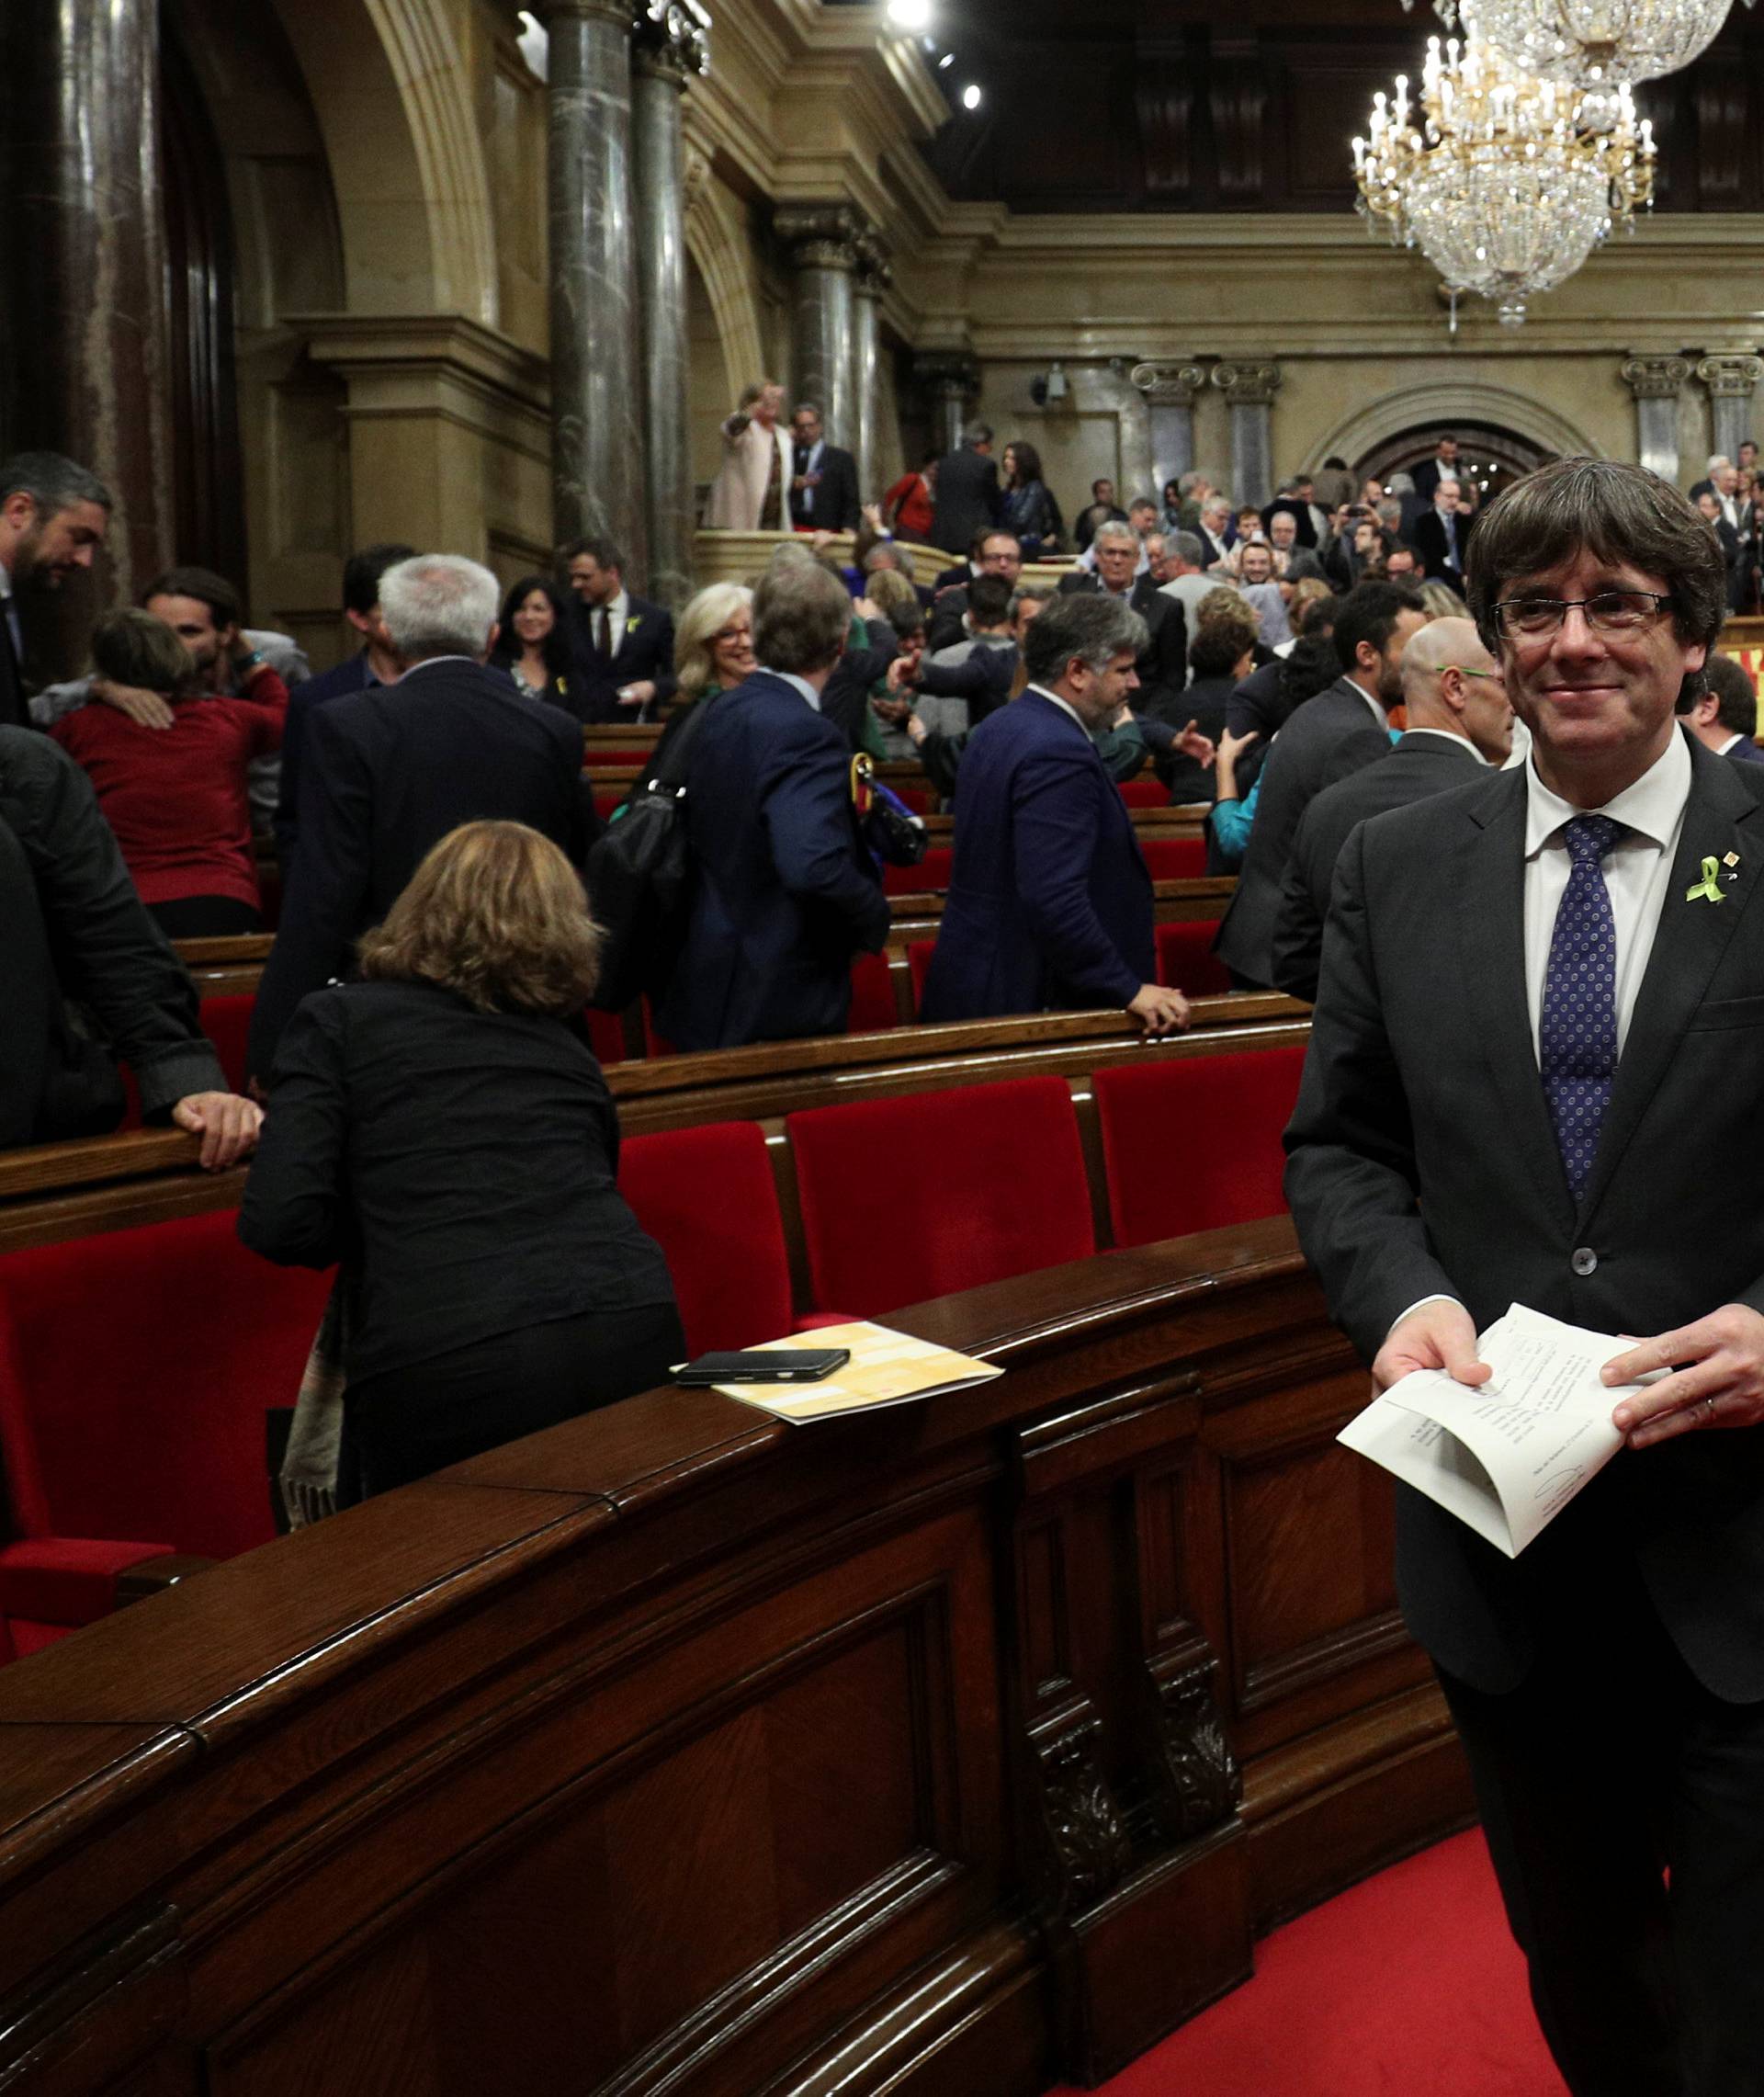 Catalan President Carles Puigdemont smiles after the Catalan regional Parliament declared independence from Spain in Barcelona